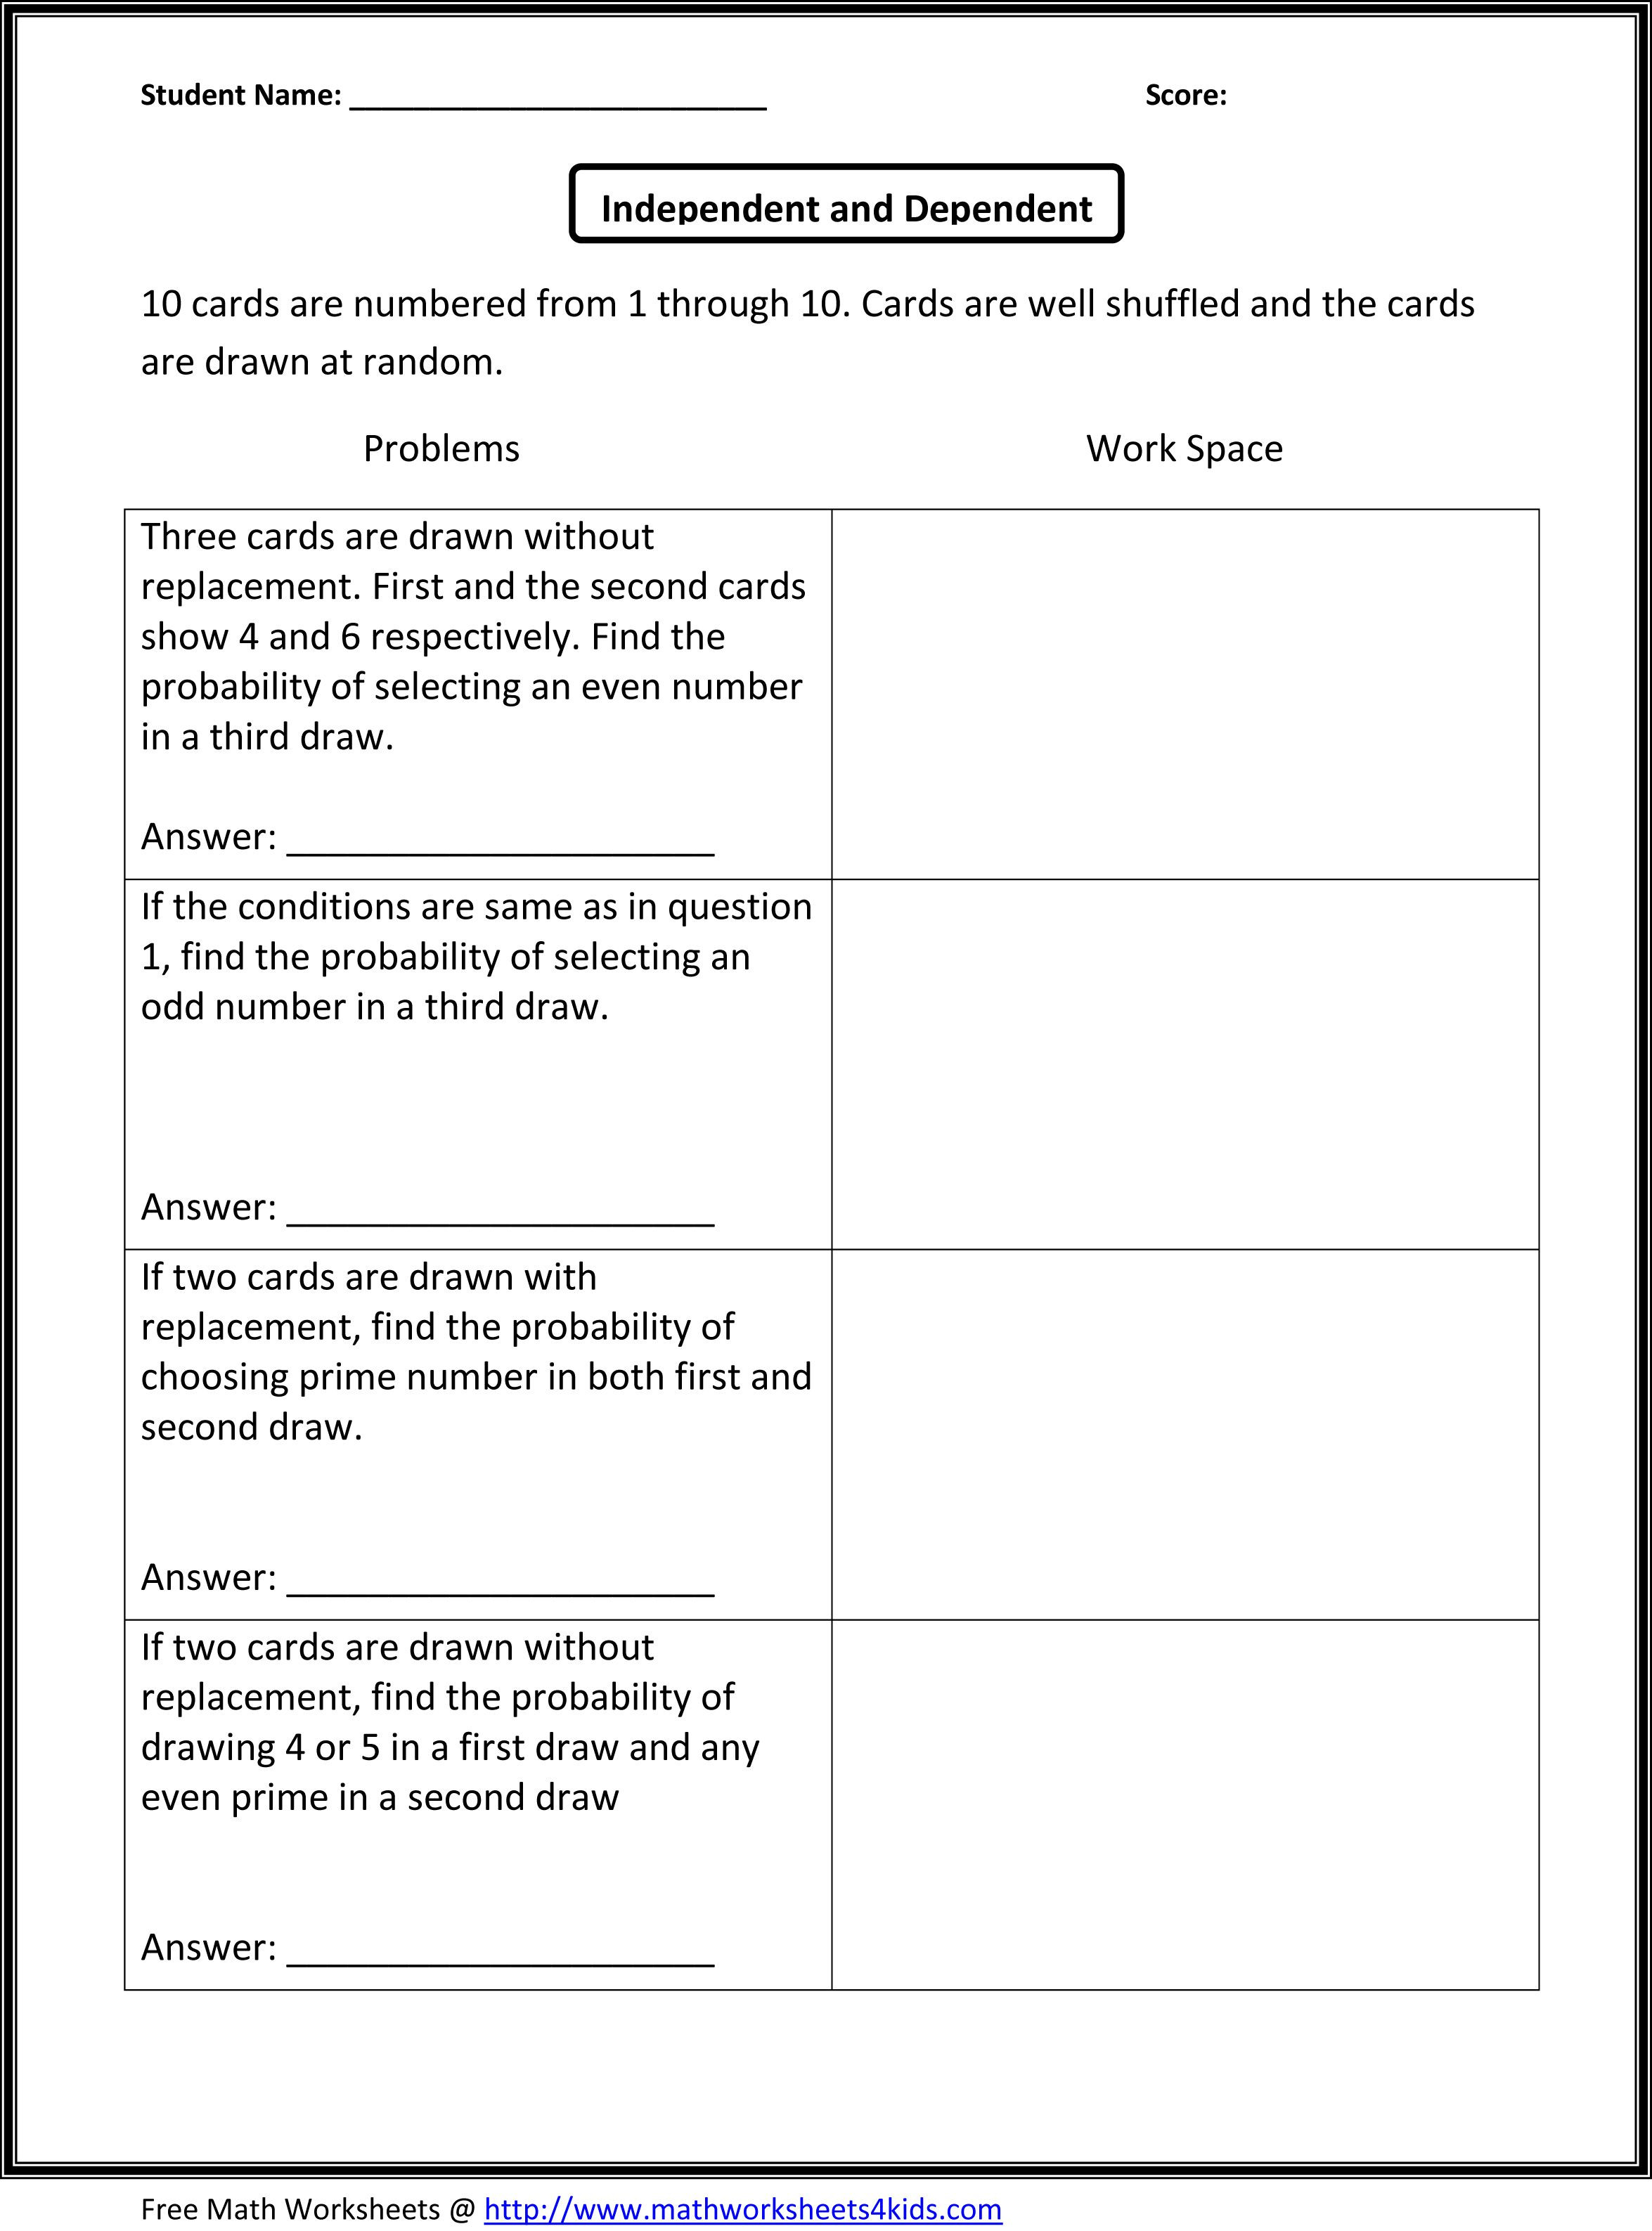 Probability Worksheet 6th Grade Probability Of Independent and Dependent events